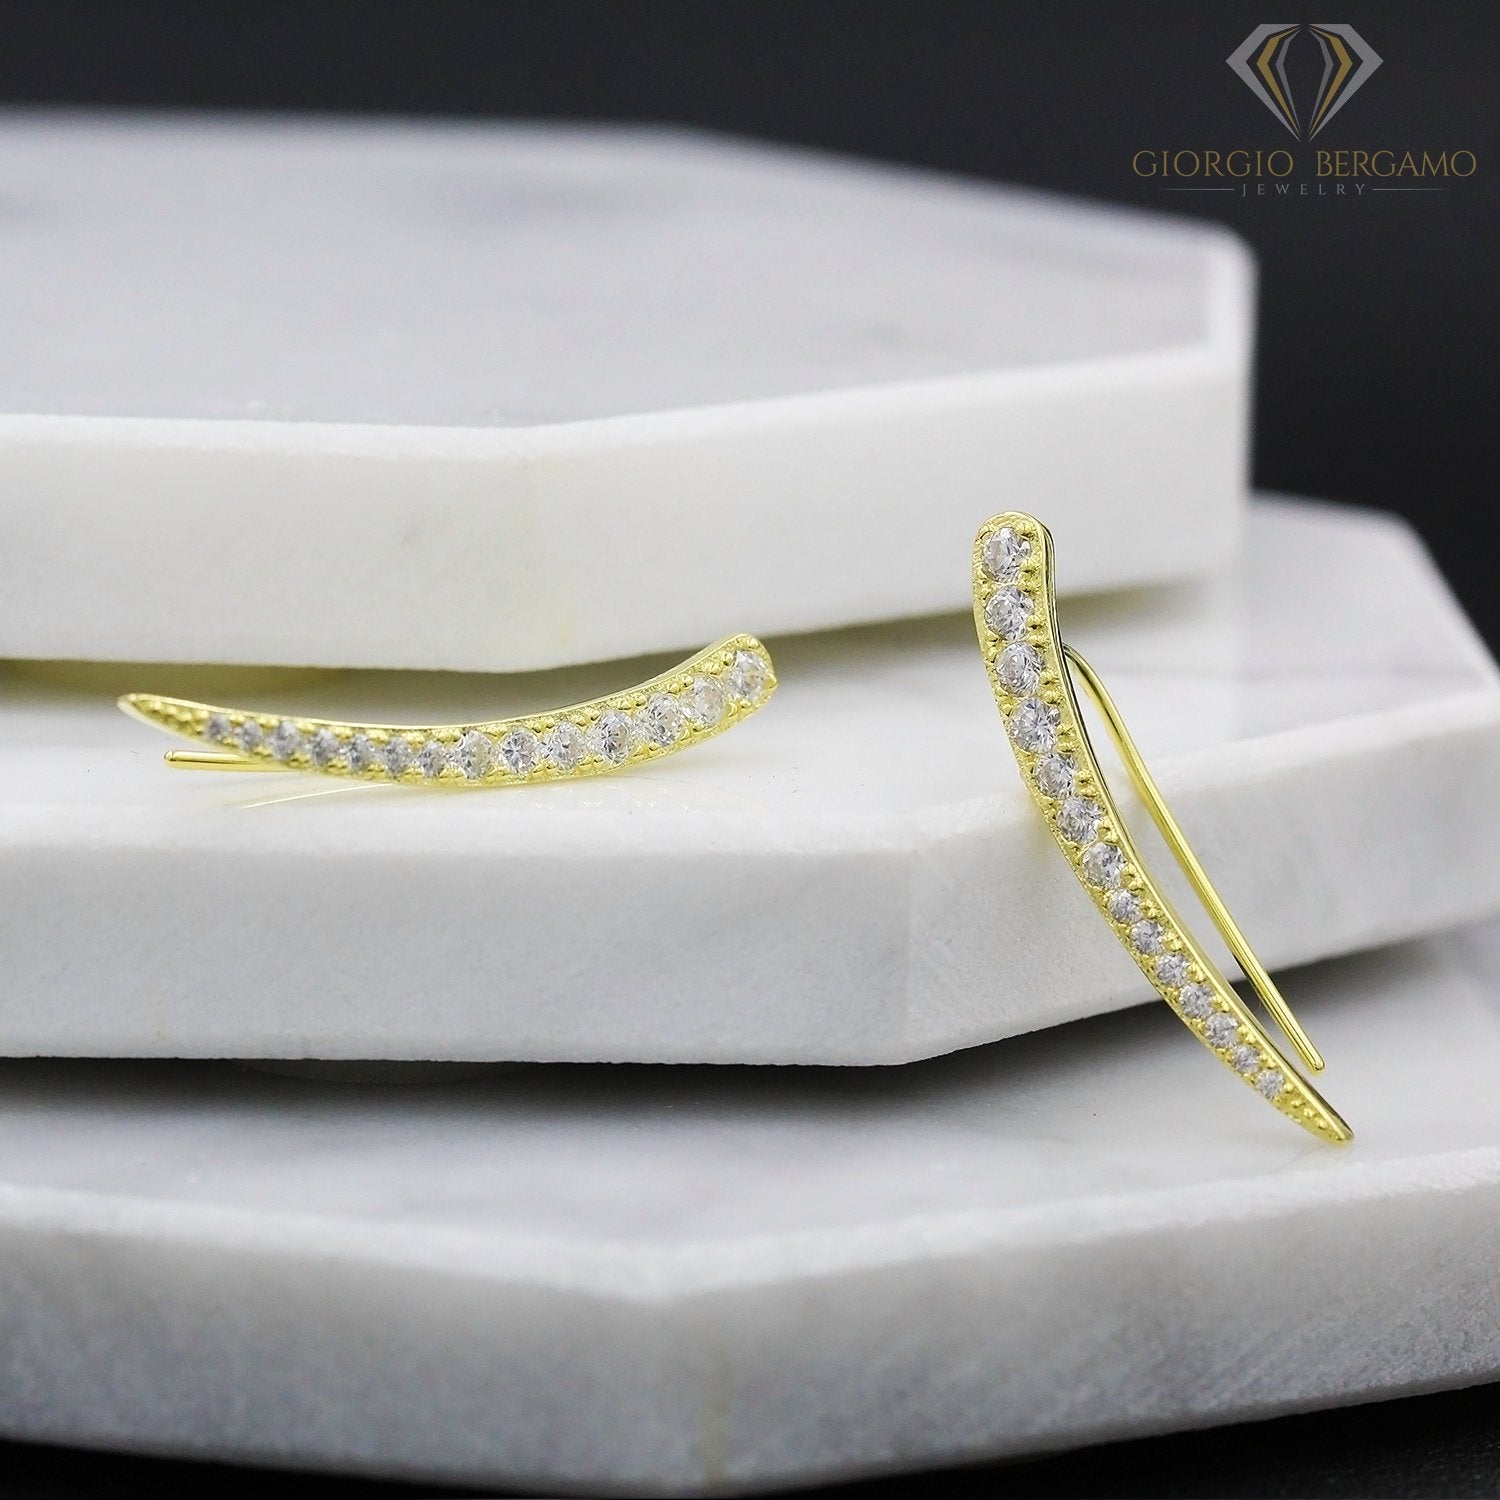 925 Sterling Silver Gold Plated Curved Bar Ear Crawler Earrings